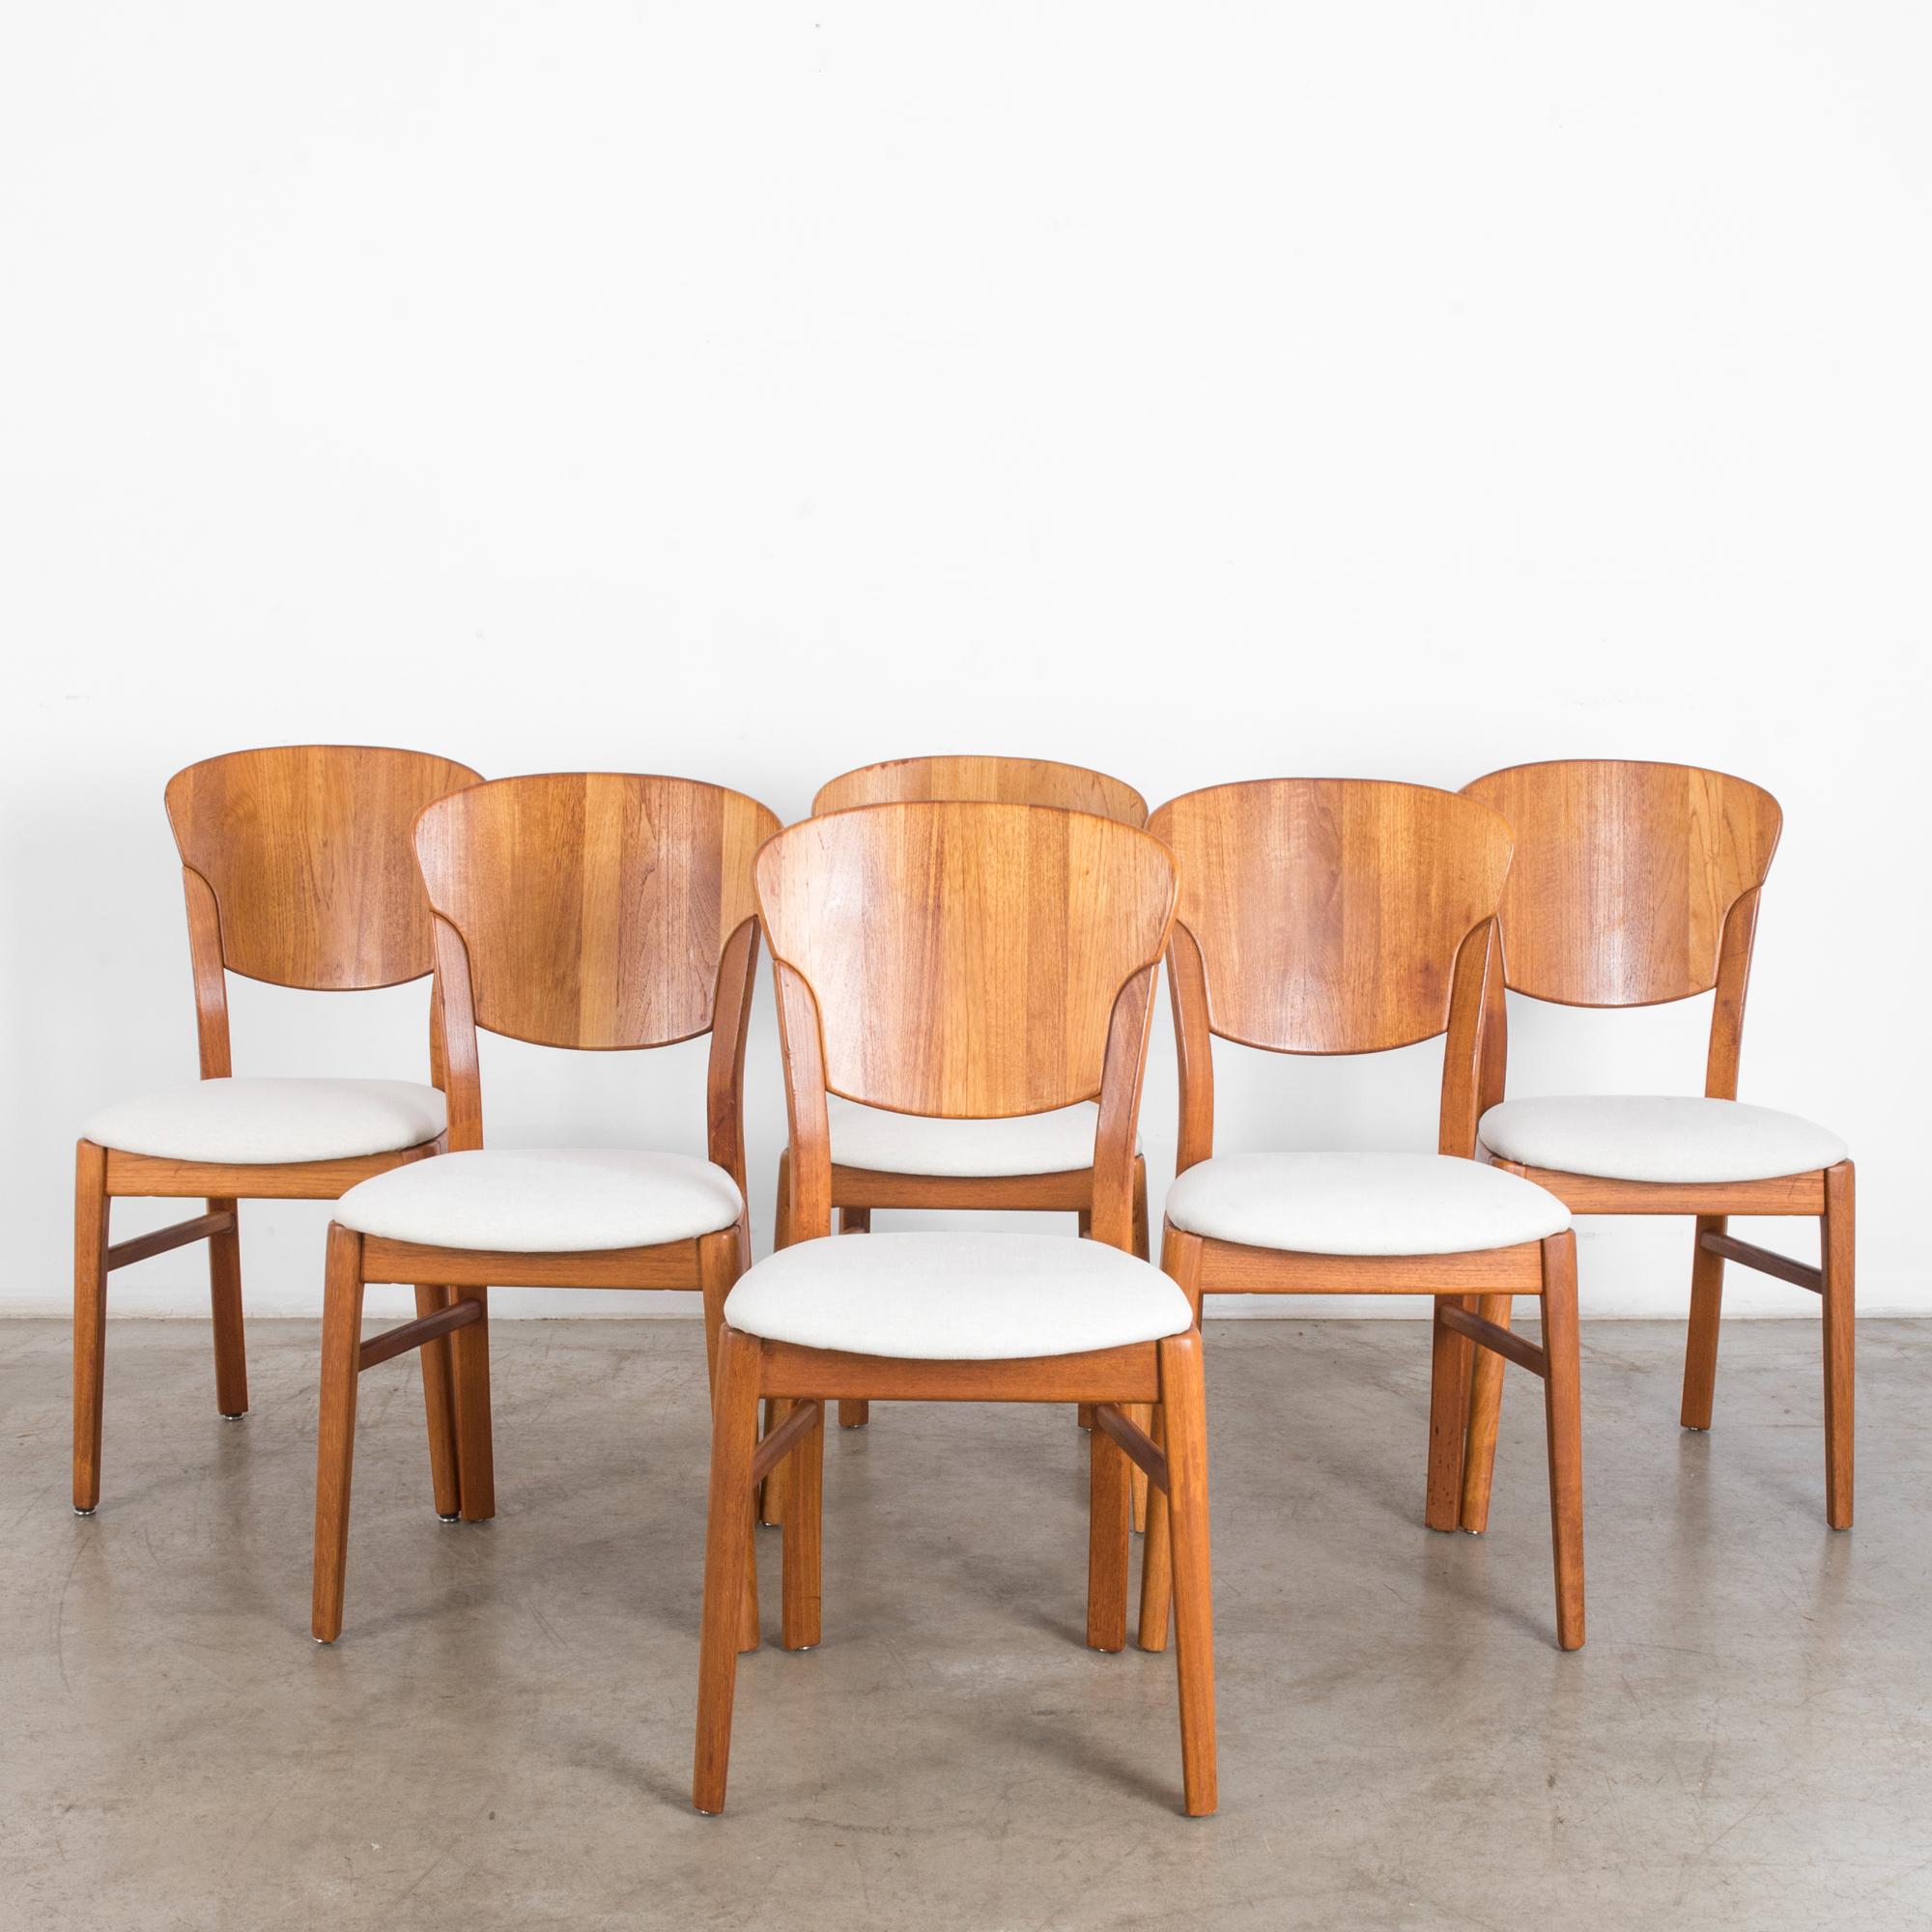 A set of six 1960s dining chairs by Danish furniture maker Glostrup Møbelfabrik. Clean design in bright and natural, warmly polished wood represents a Scandinavian Modernist sensibility. The subtle curve of the backrest emulates the arch of the